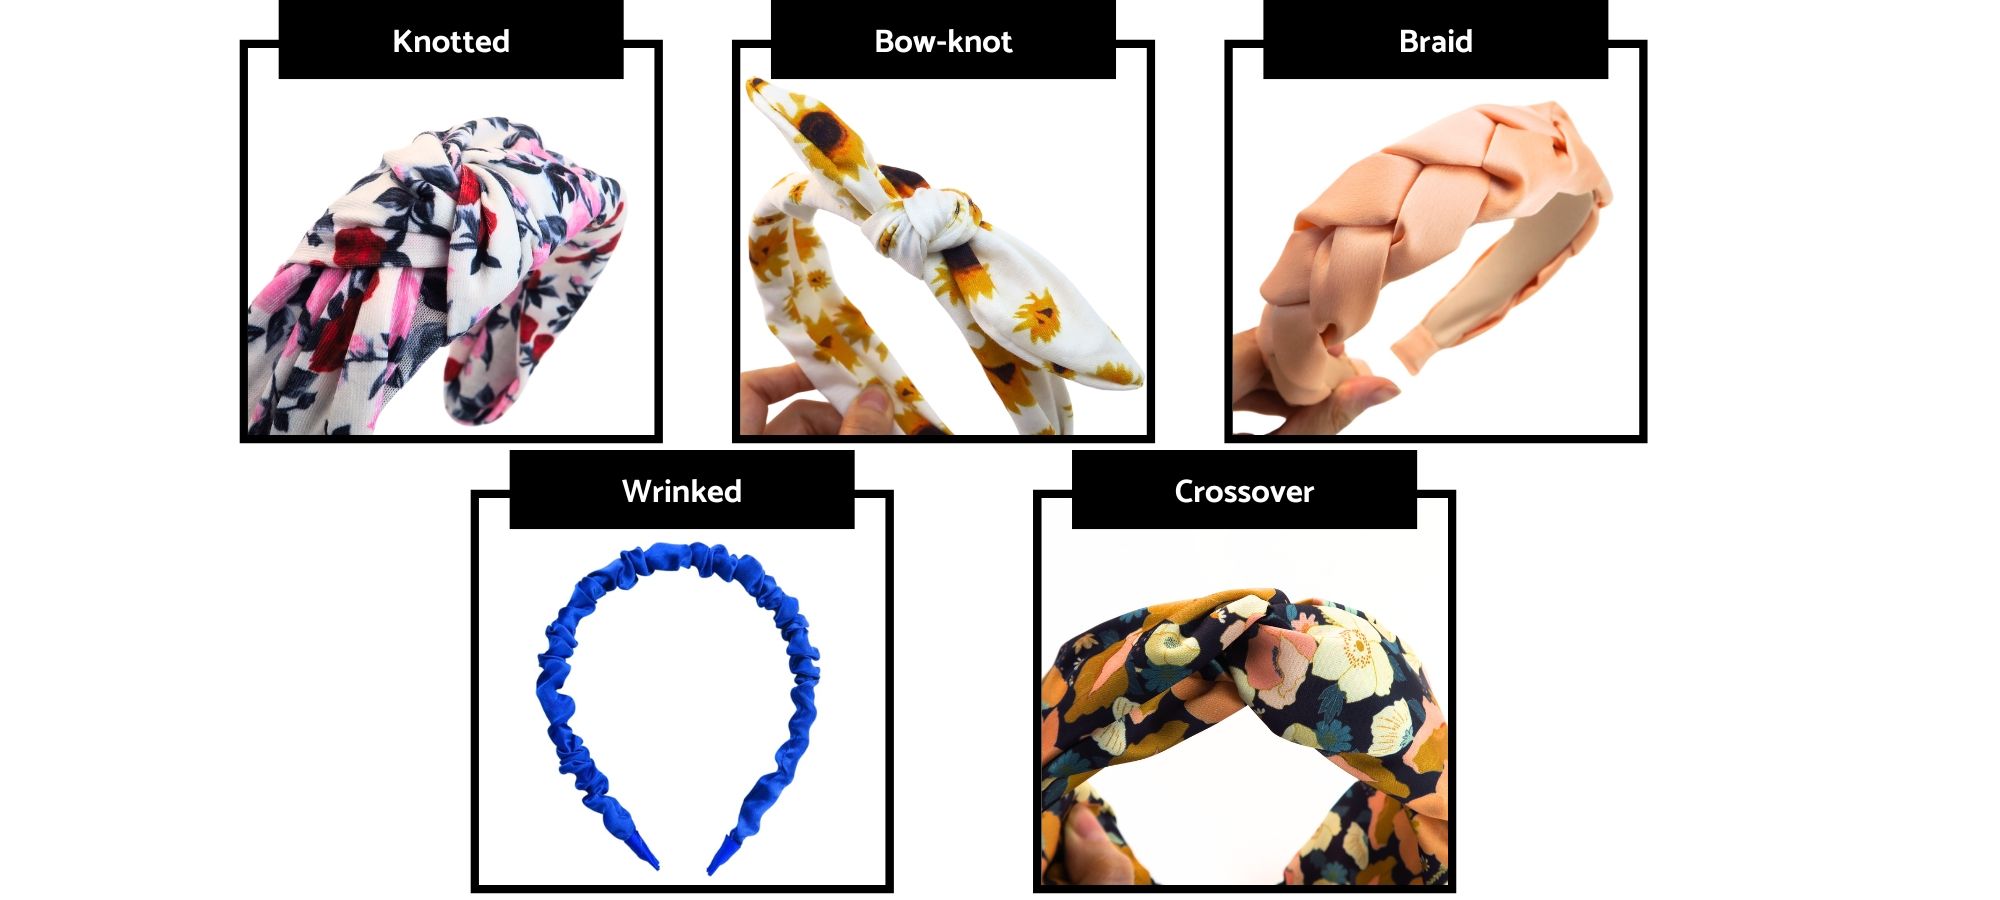 Stand out from the crowd with custom headbands tailored to your preferences by our factory.